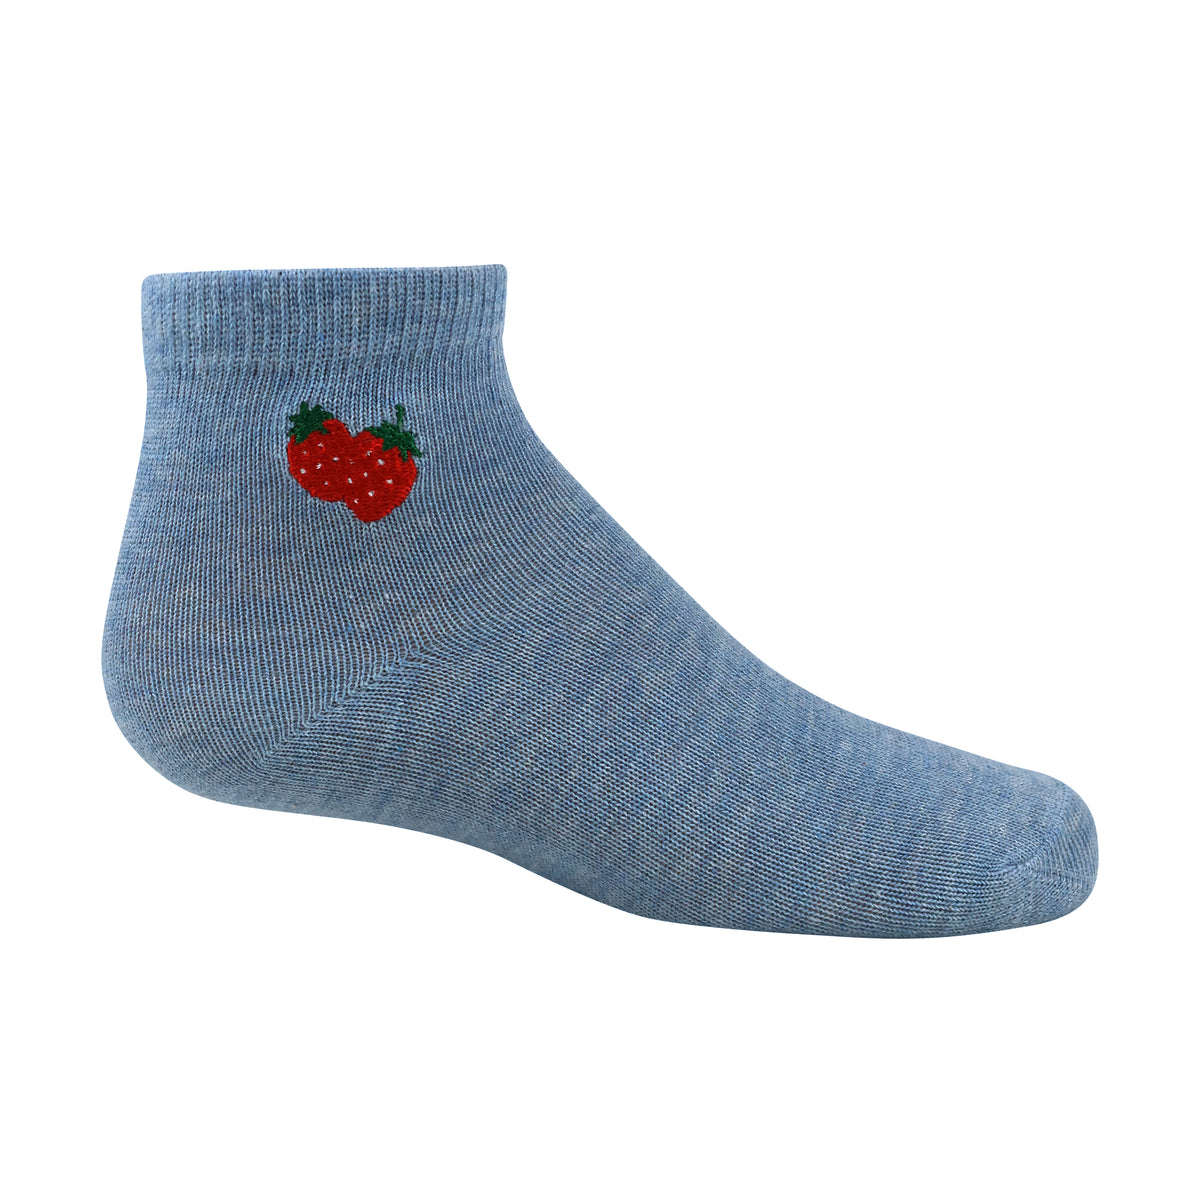 Embroidered Strawberry Ankle